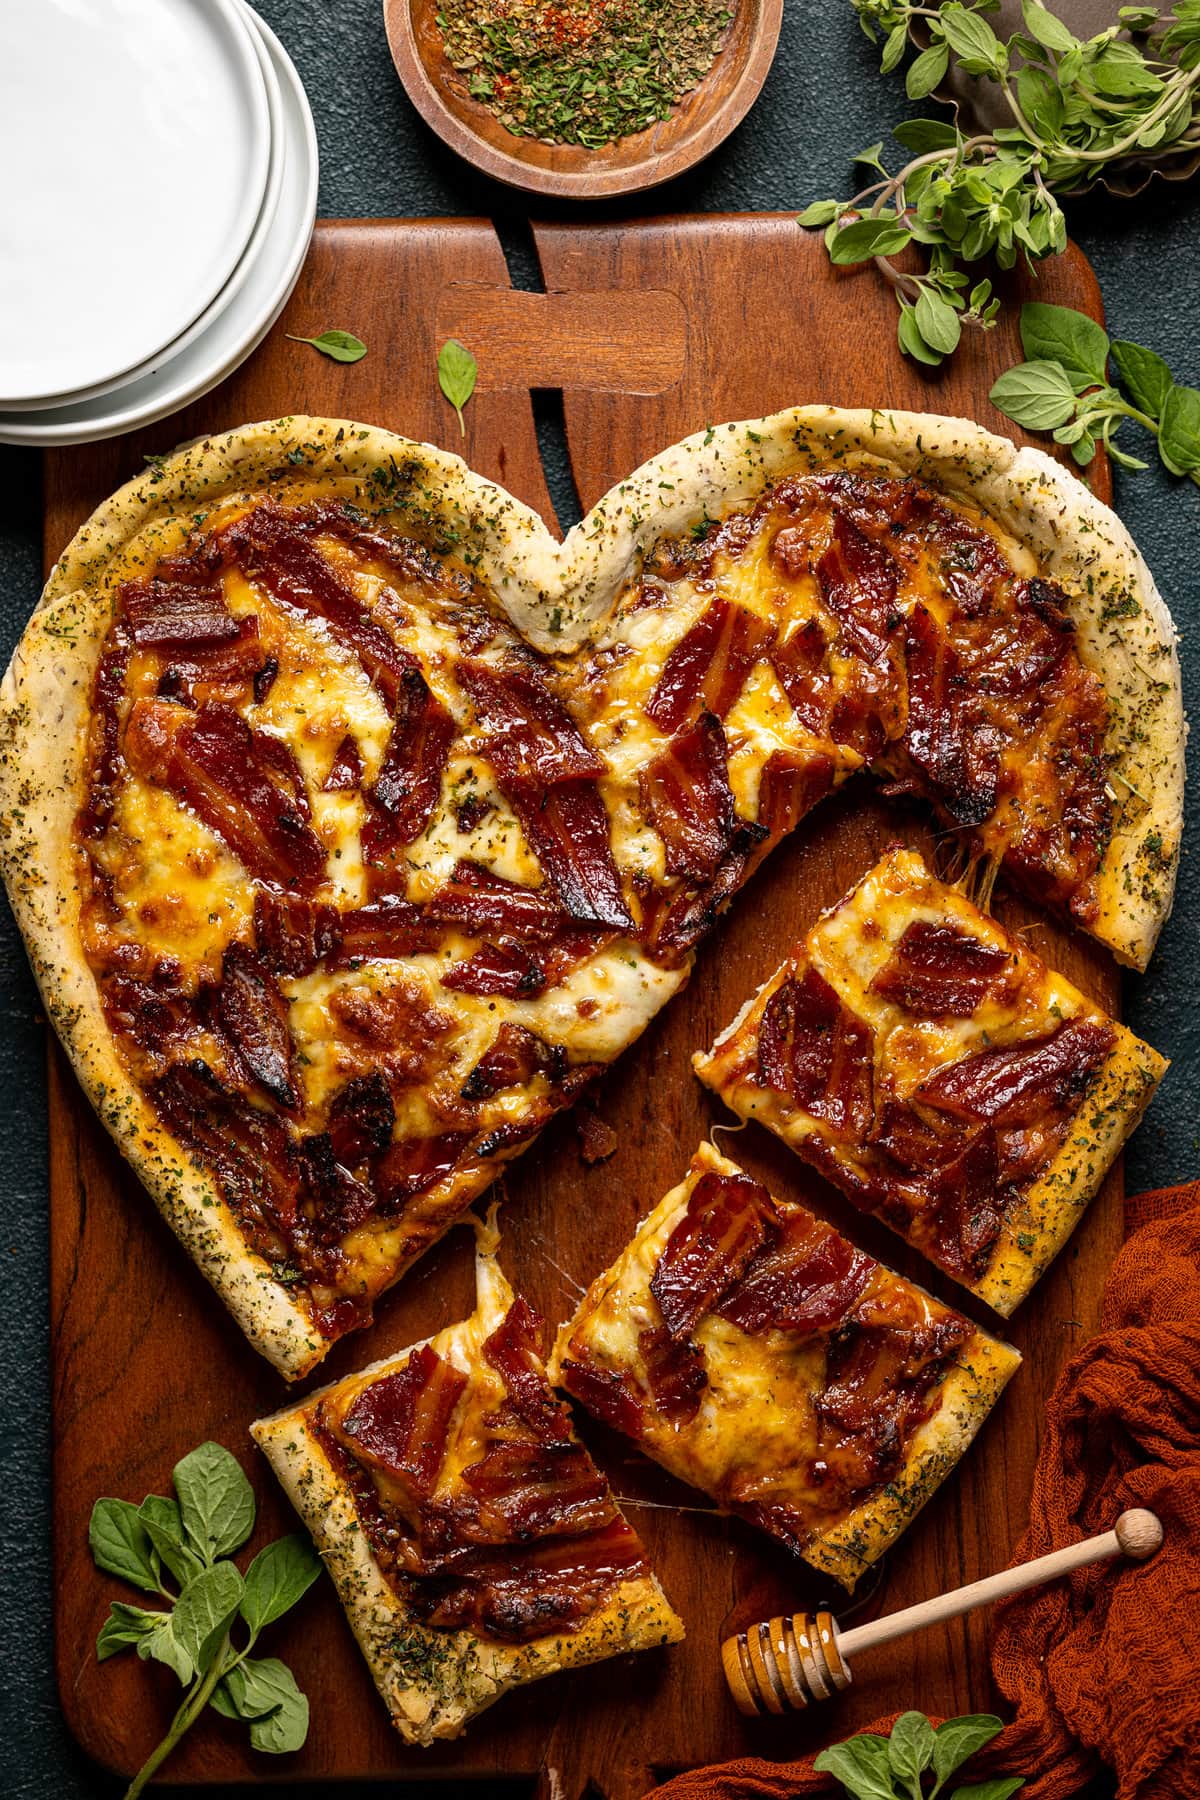 Heart-shaped Gluten-Free Hot Honey Bacon Pizza being cut into pieces